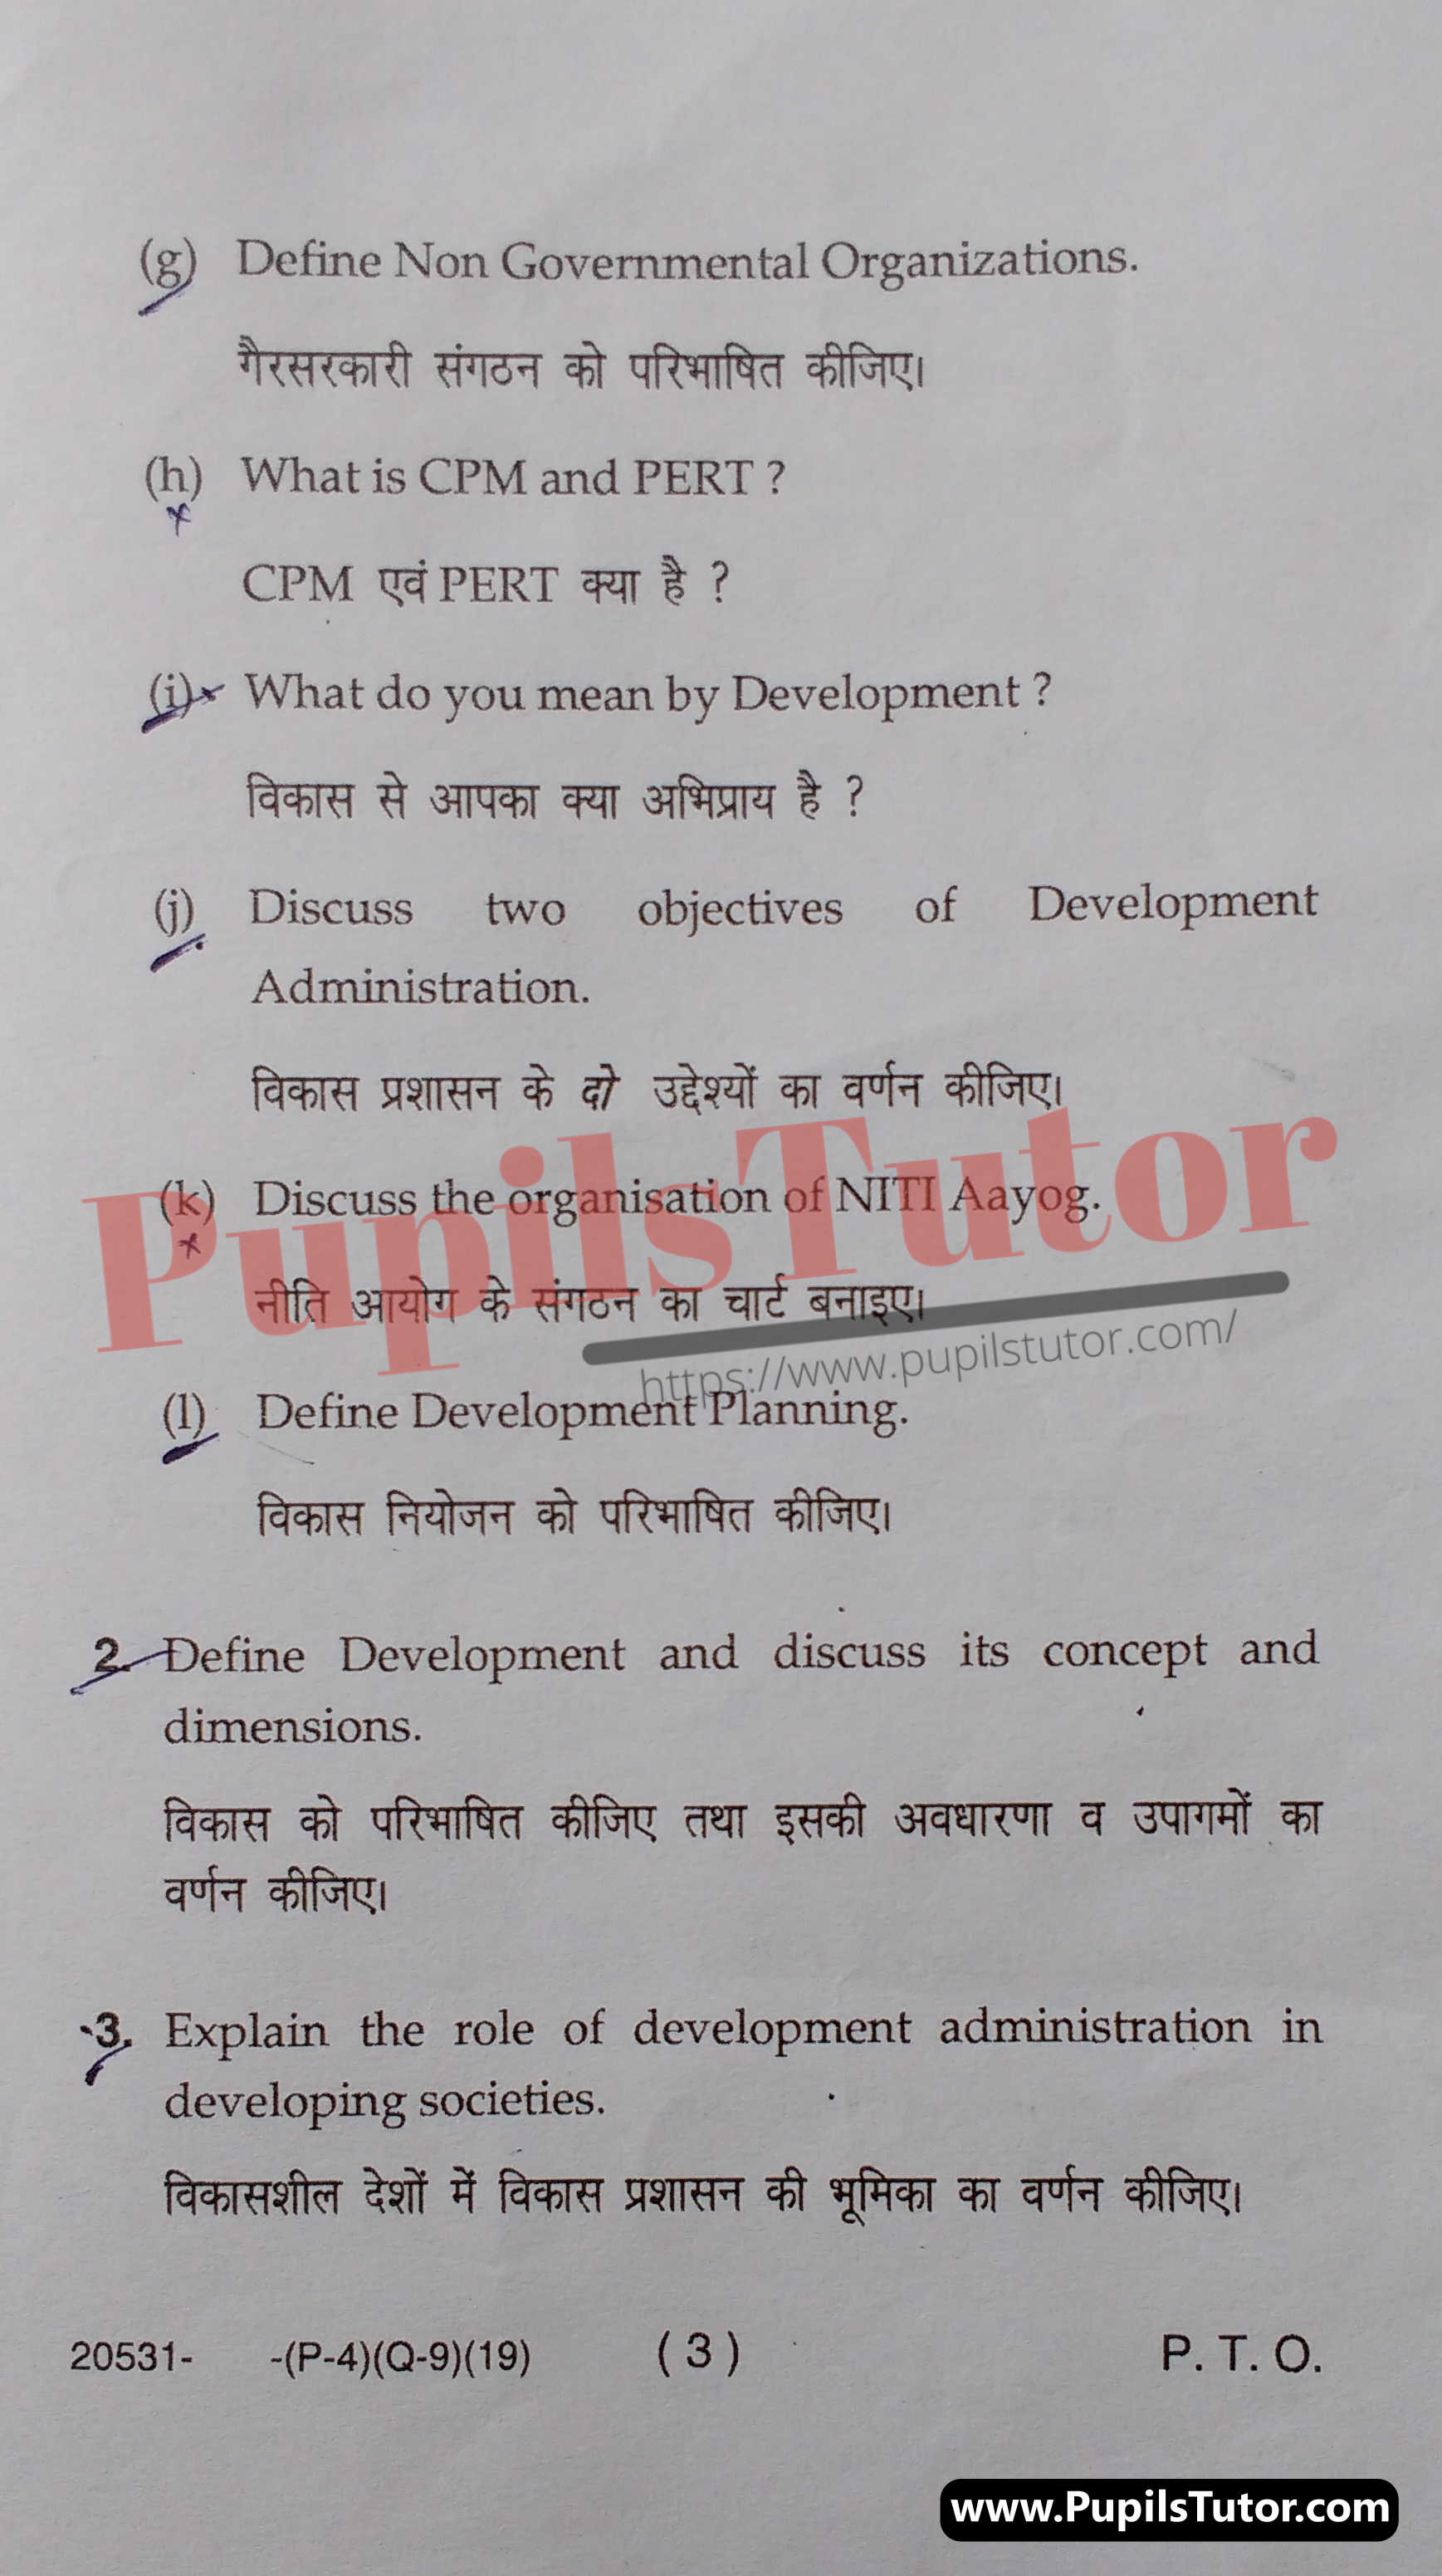 Free Download PDF Of M.D. University M.A. [Public Administration] Second Year Latest Question Paper For Development Administration Subject (Page 3) - https://www.pupilstutor.com